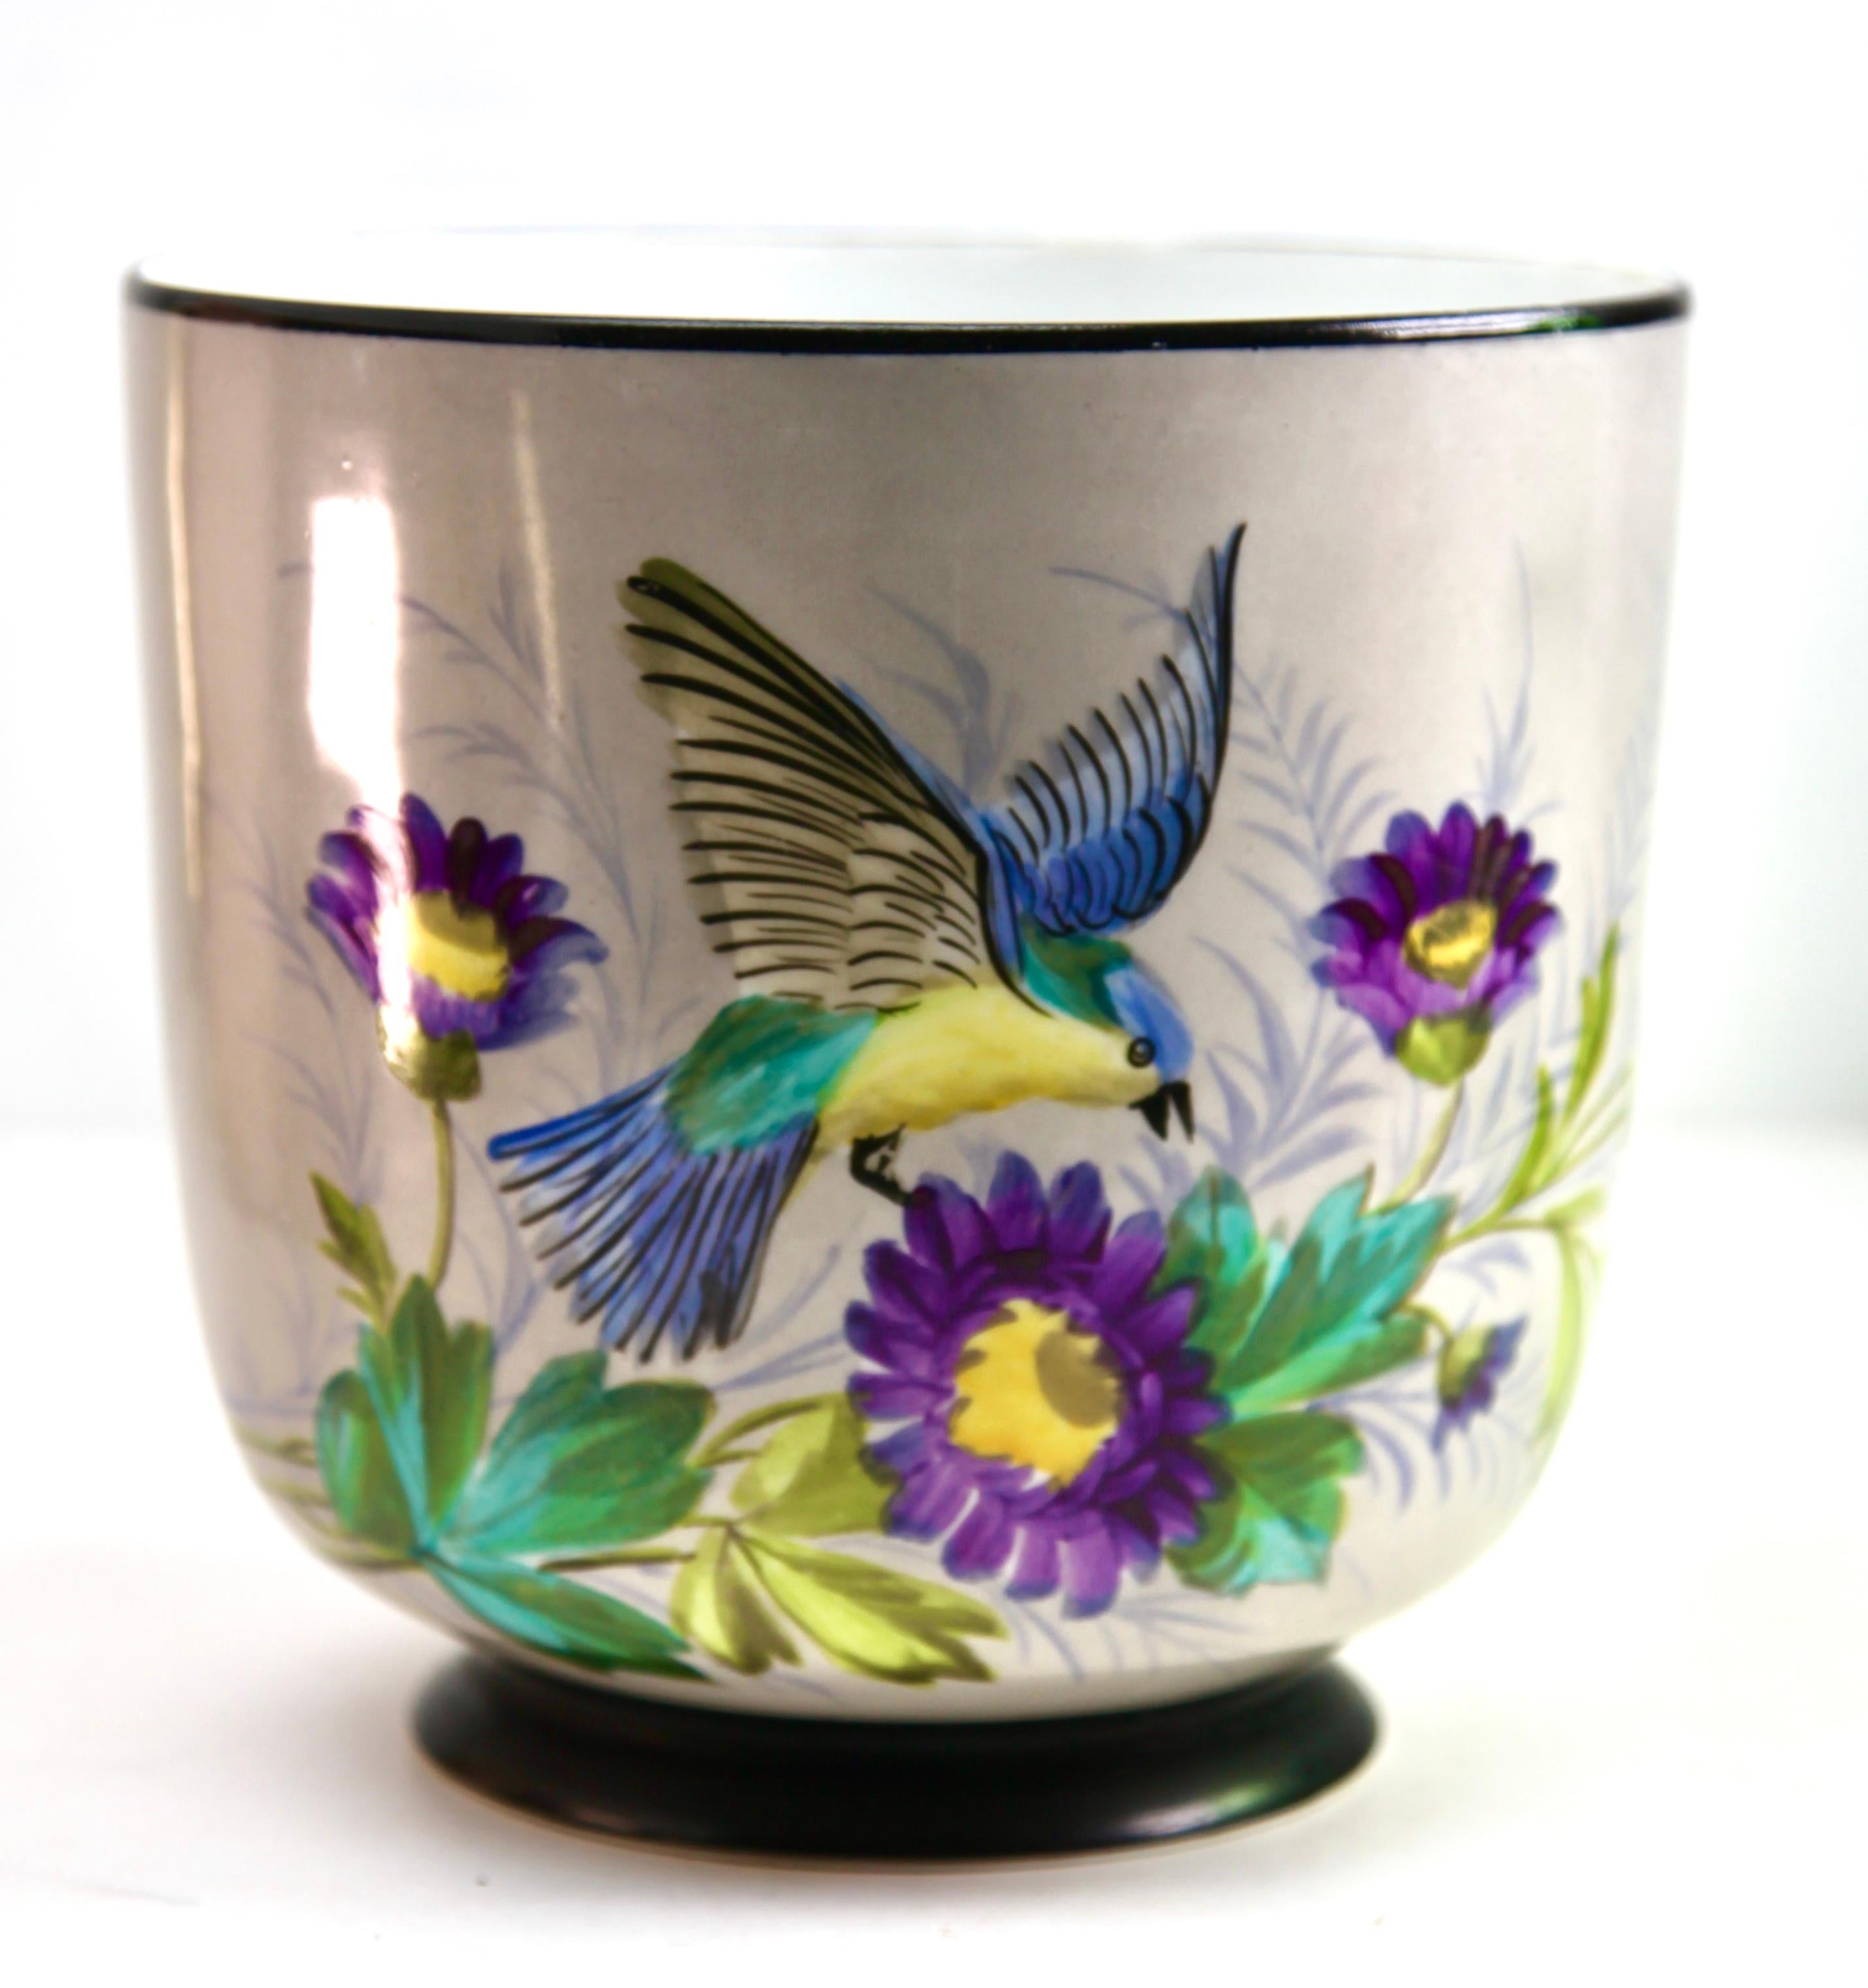 Porcelain planter, cachepot hand-painted whit bird and flowers.